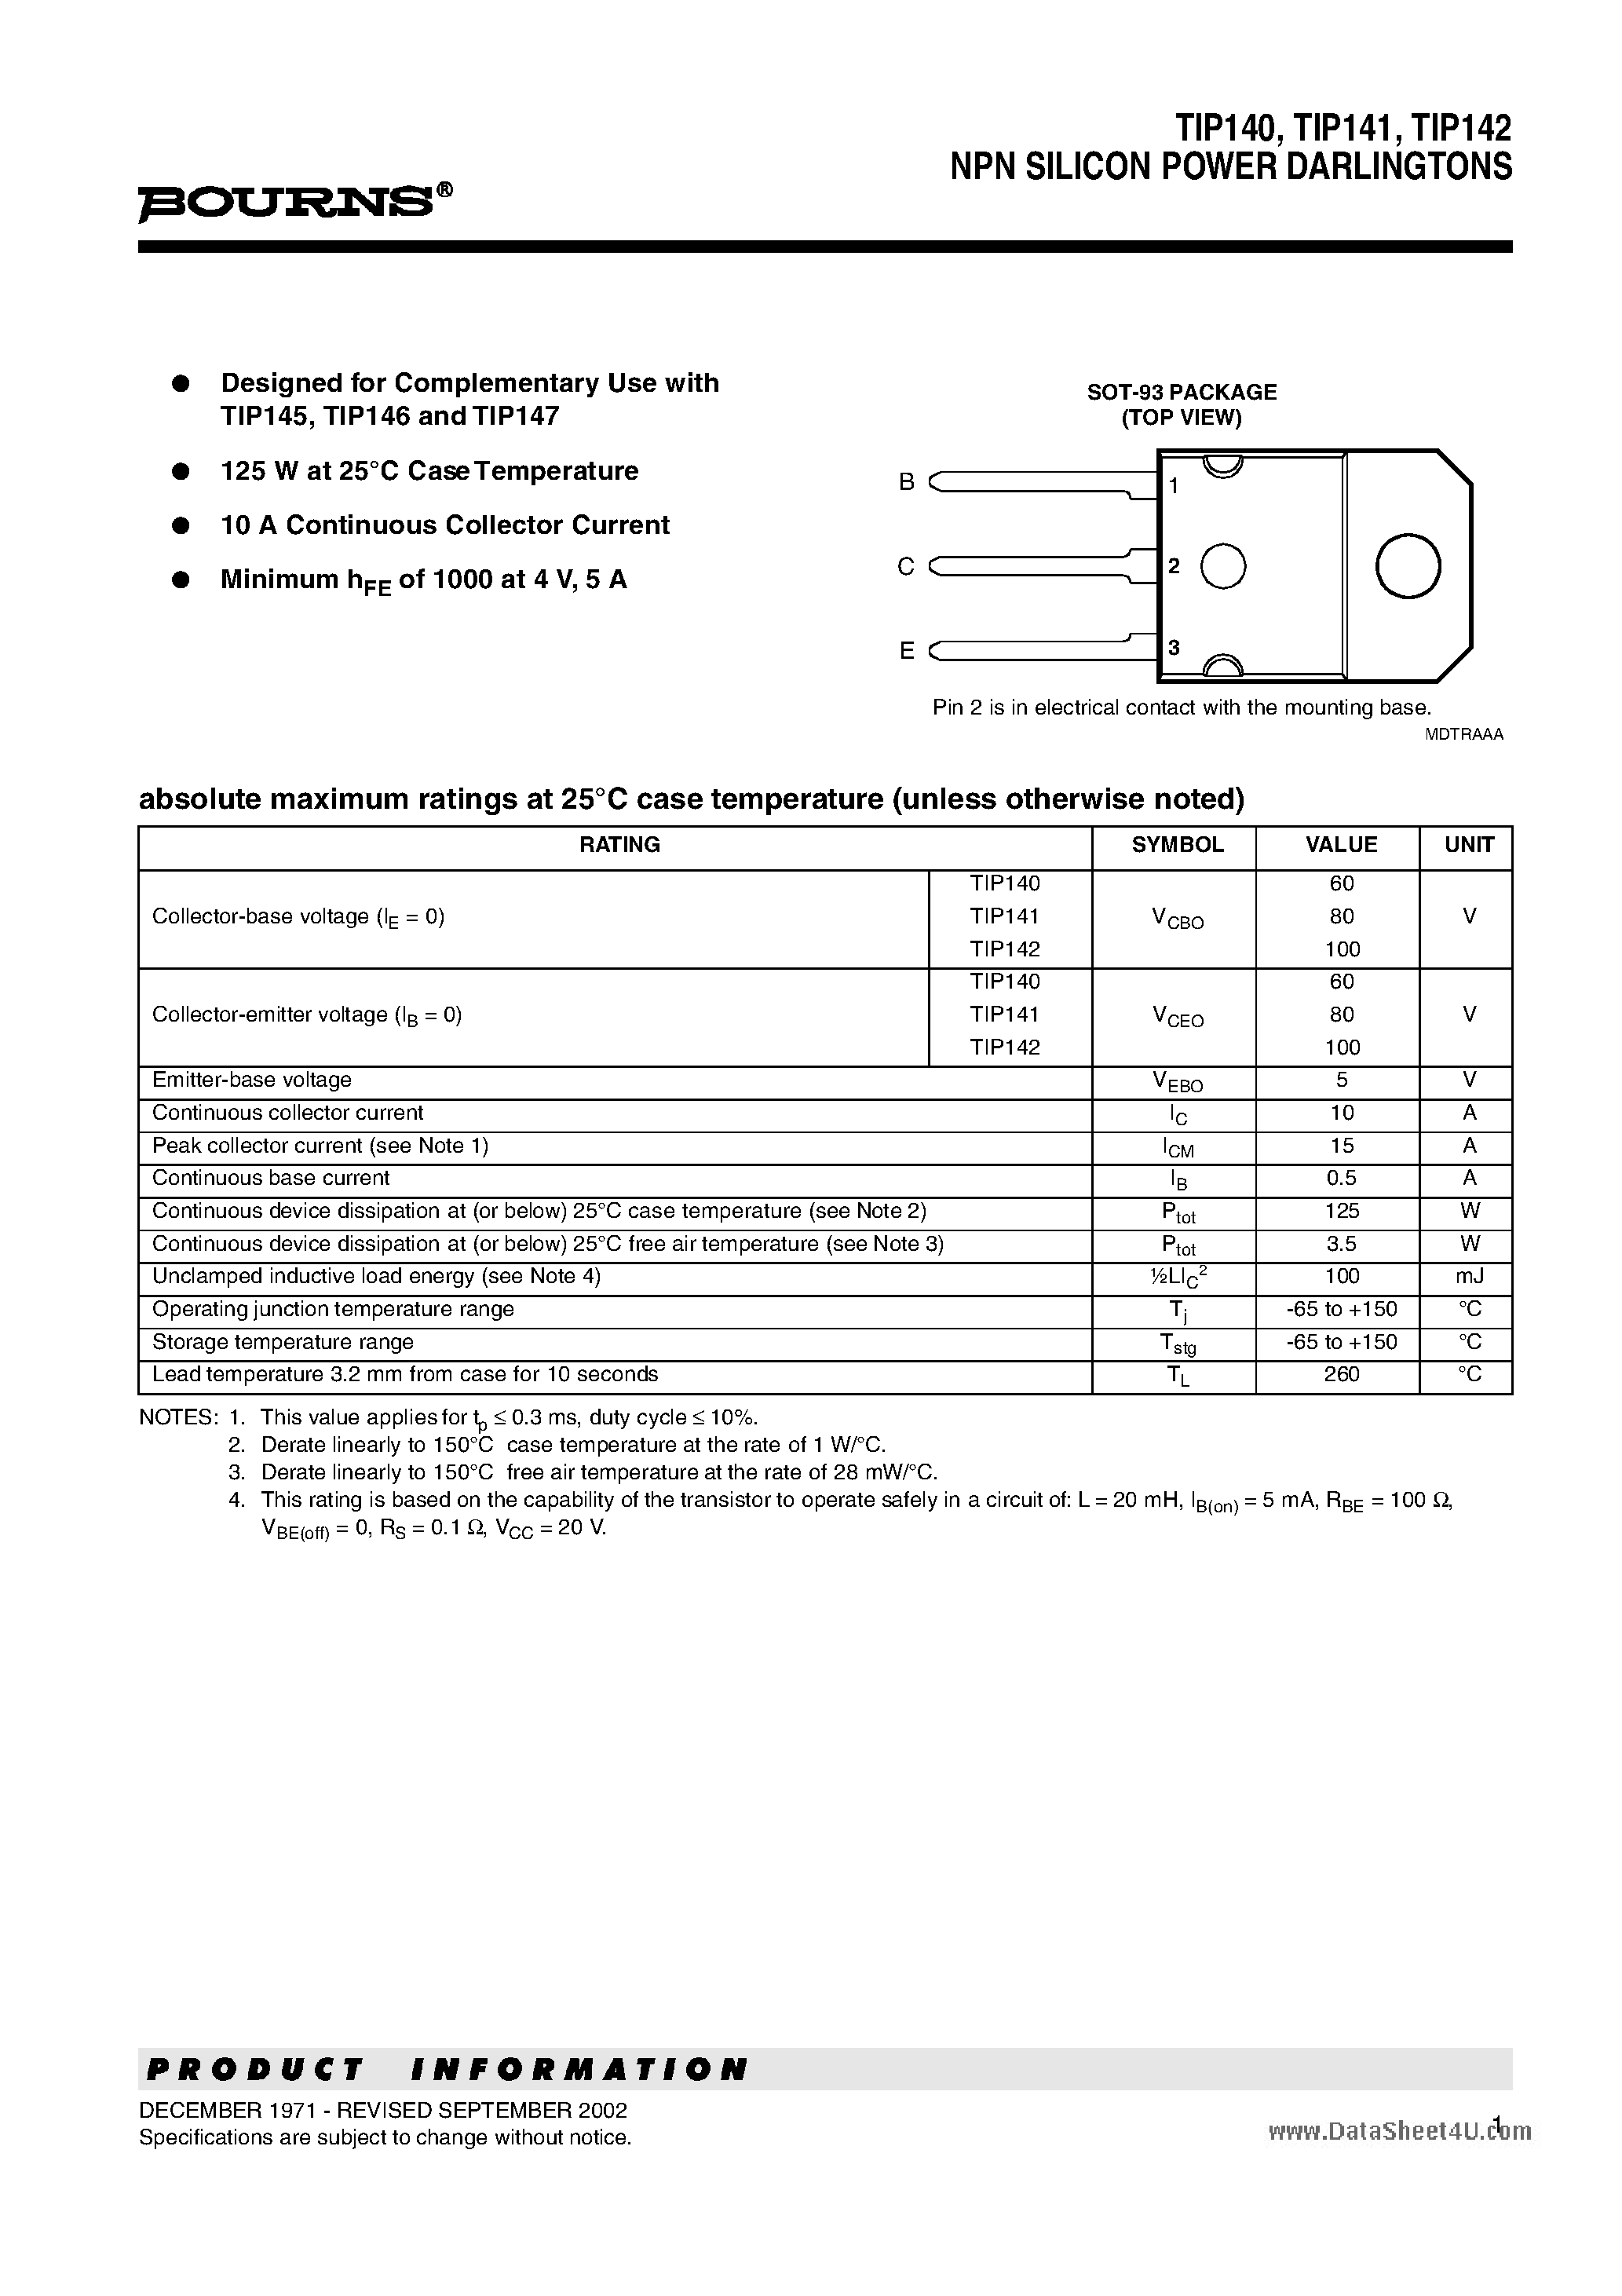 Datasheet TIP140 - (TIP140 - TIP142) NPN SILICON POWER DARLINGTONS page 1